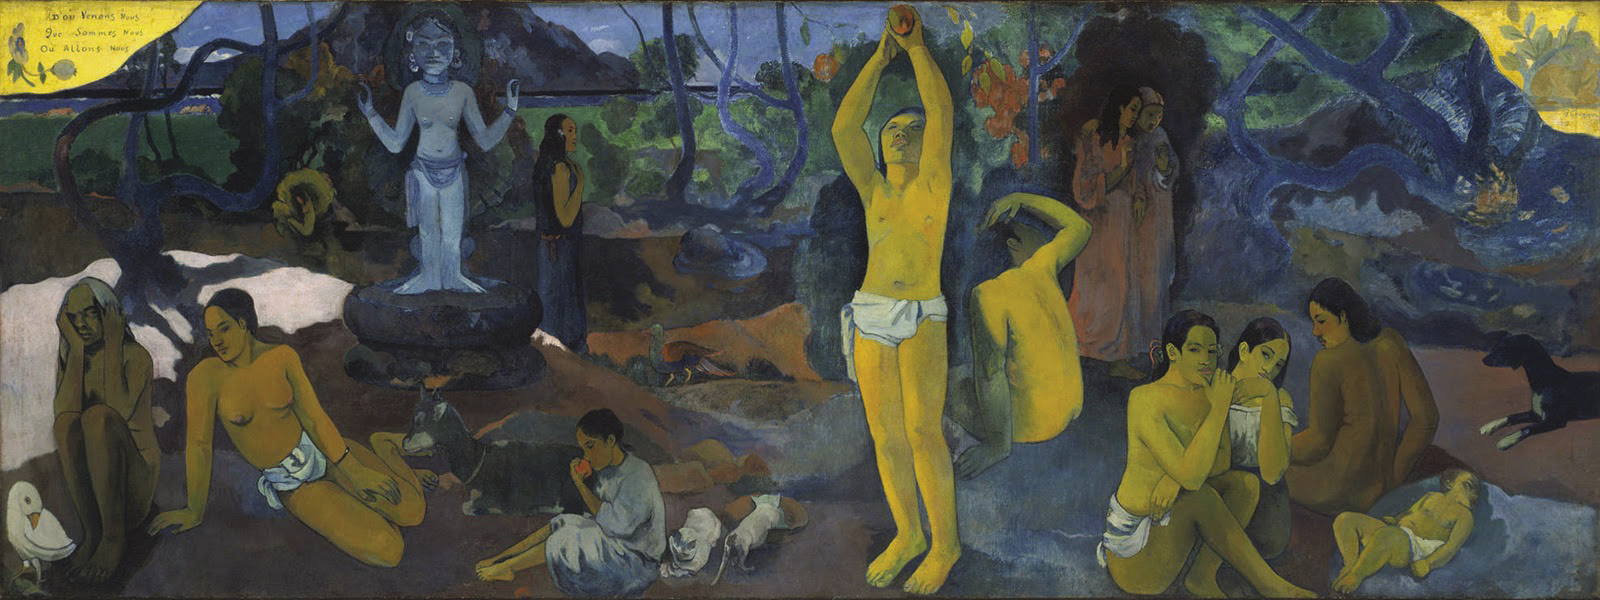 Where do we come from?, Gauguin